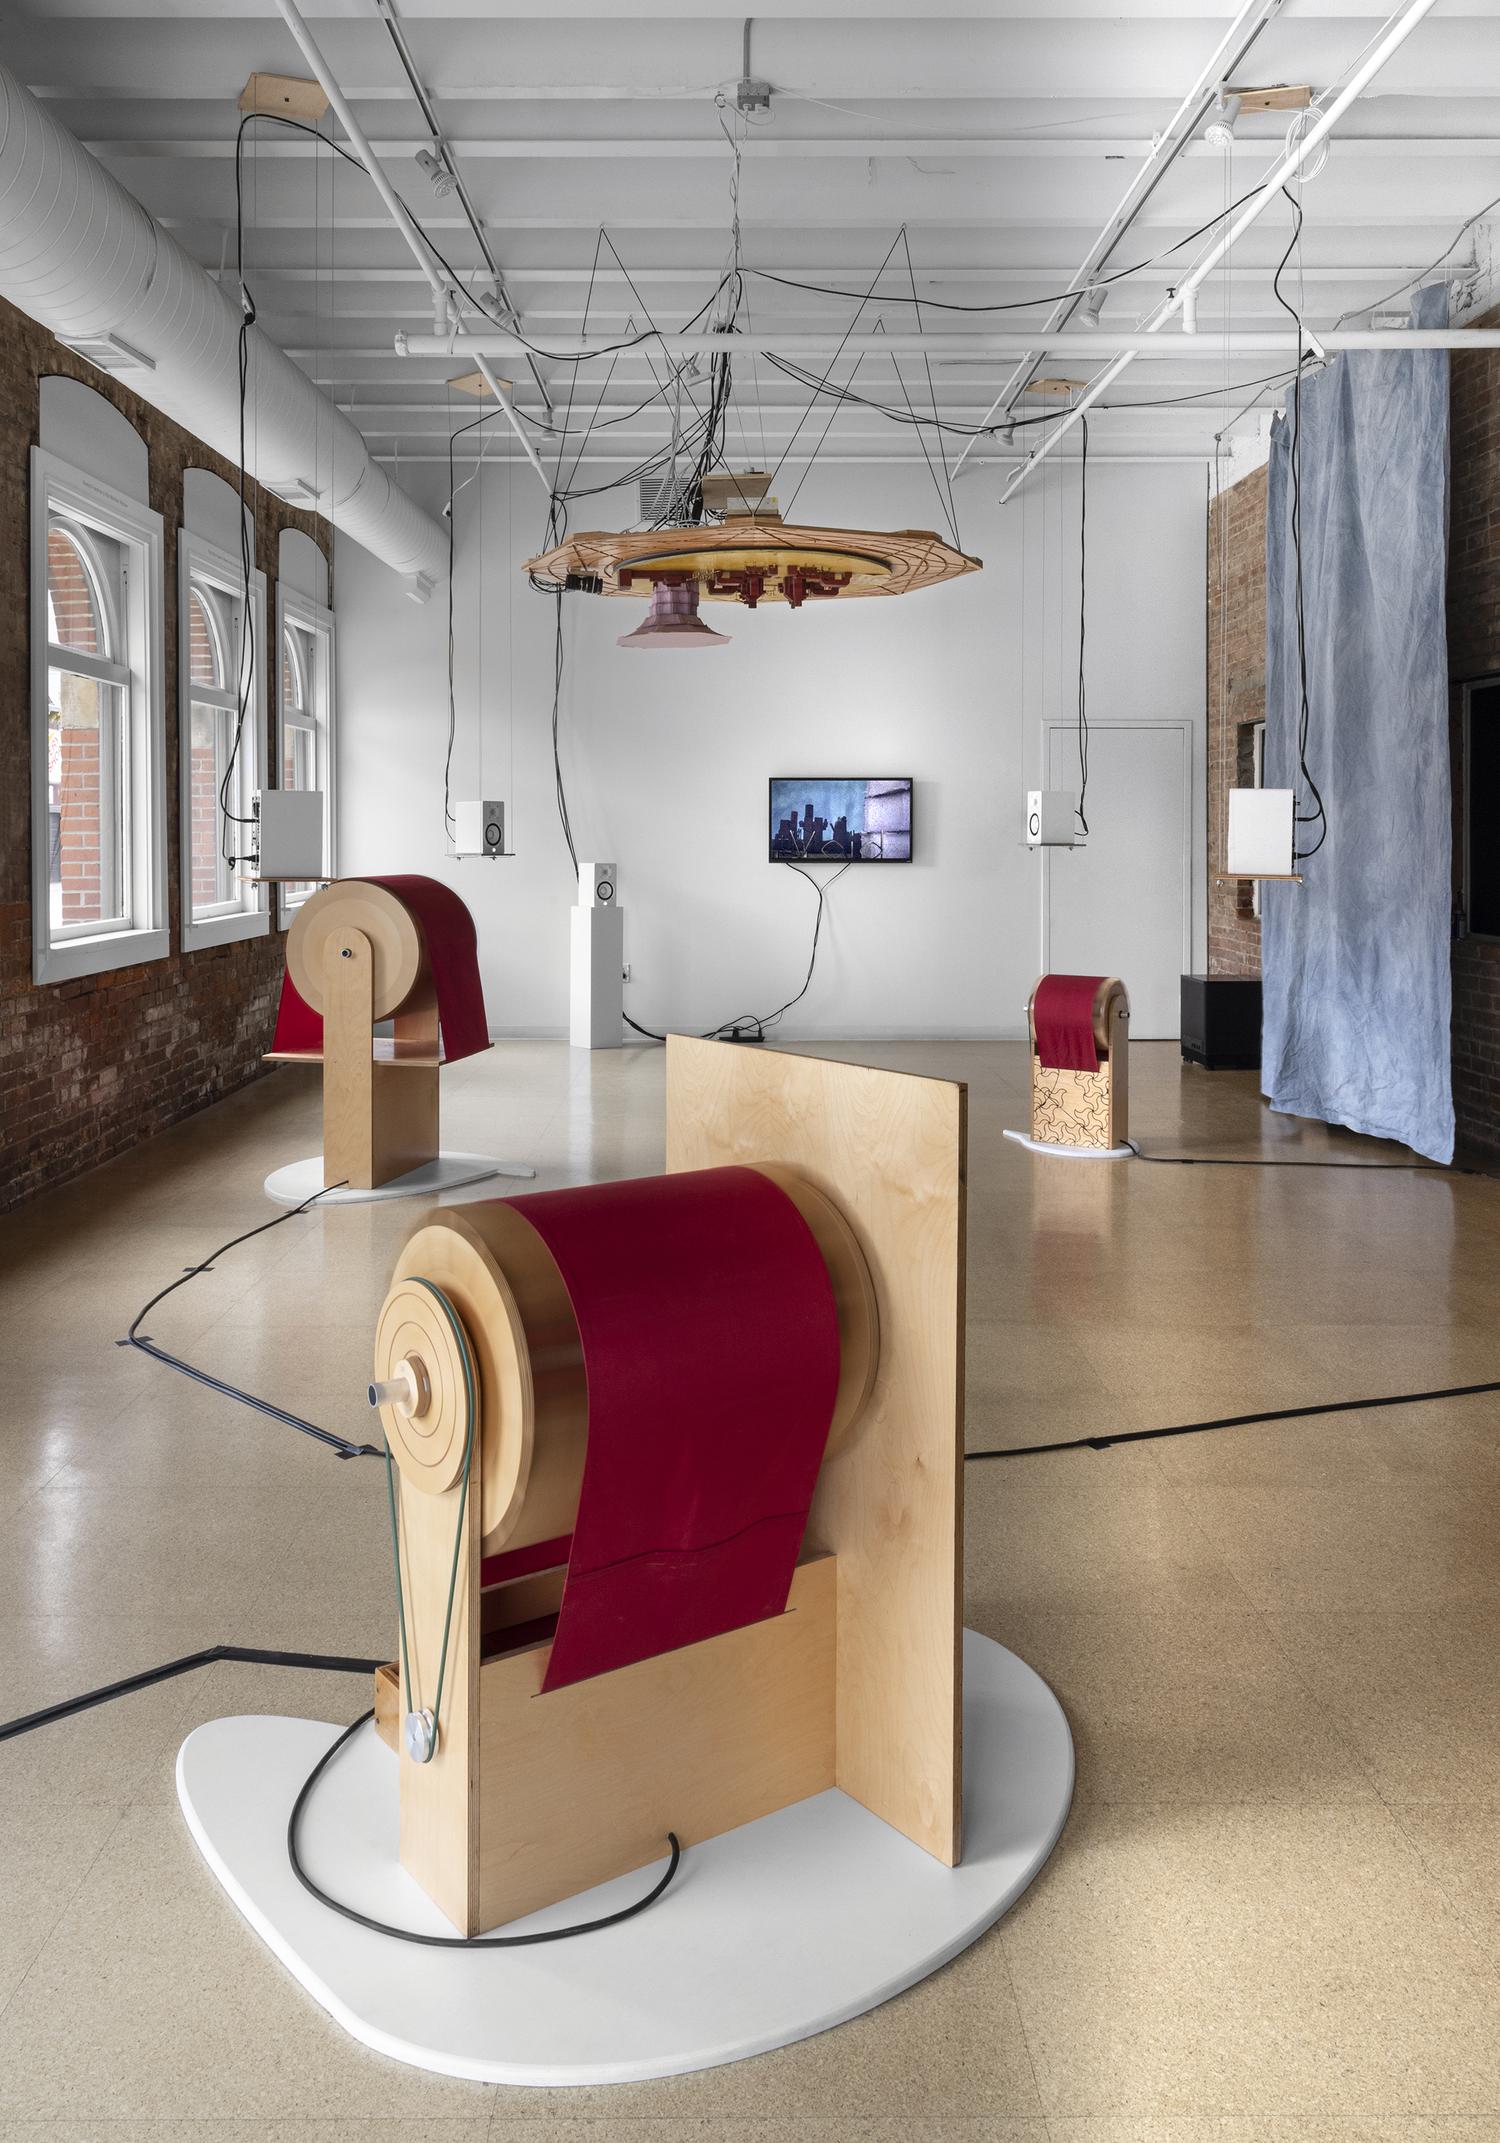 A gallery space with several floor standing sculptures resembling motors or barrels that seem to all be electrically powered with many black wires connecting them all.